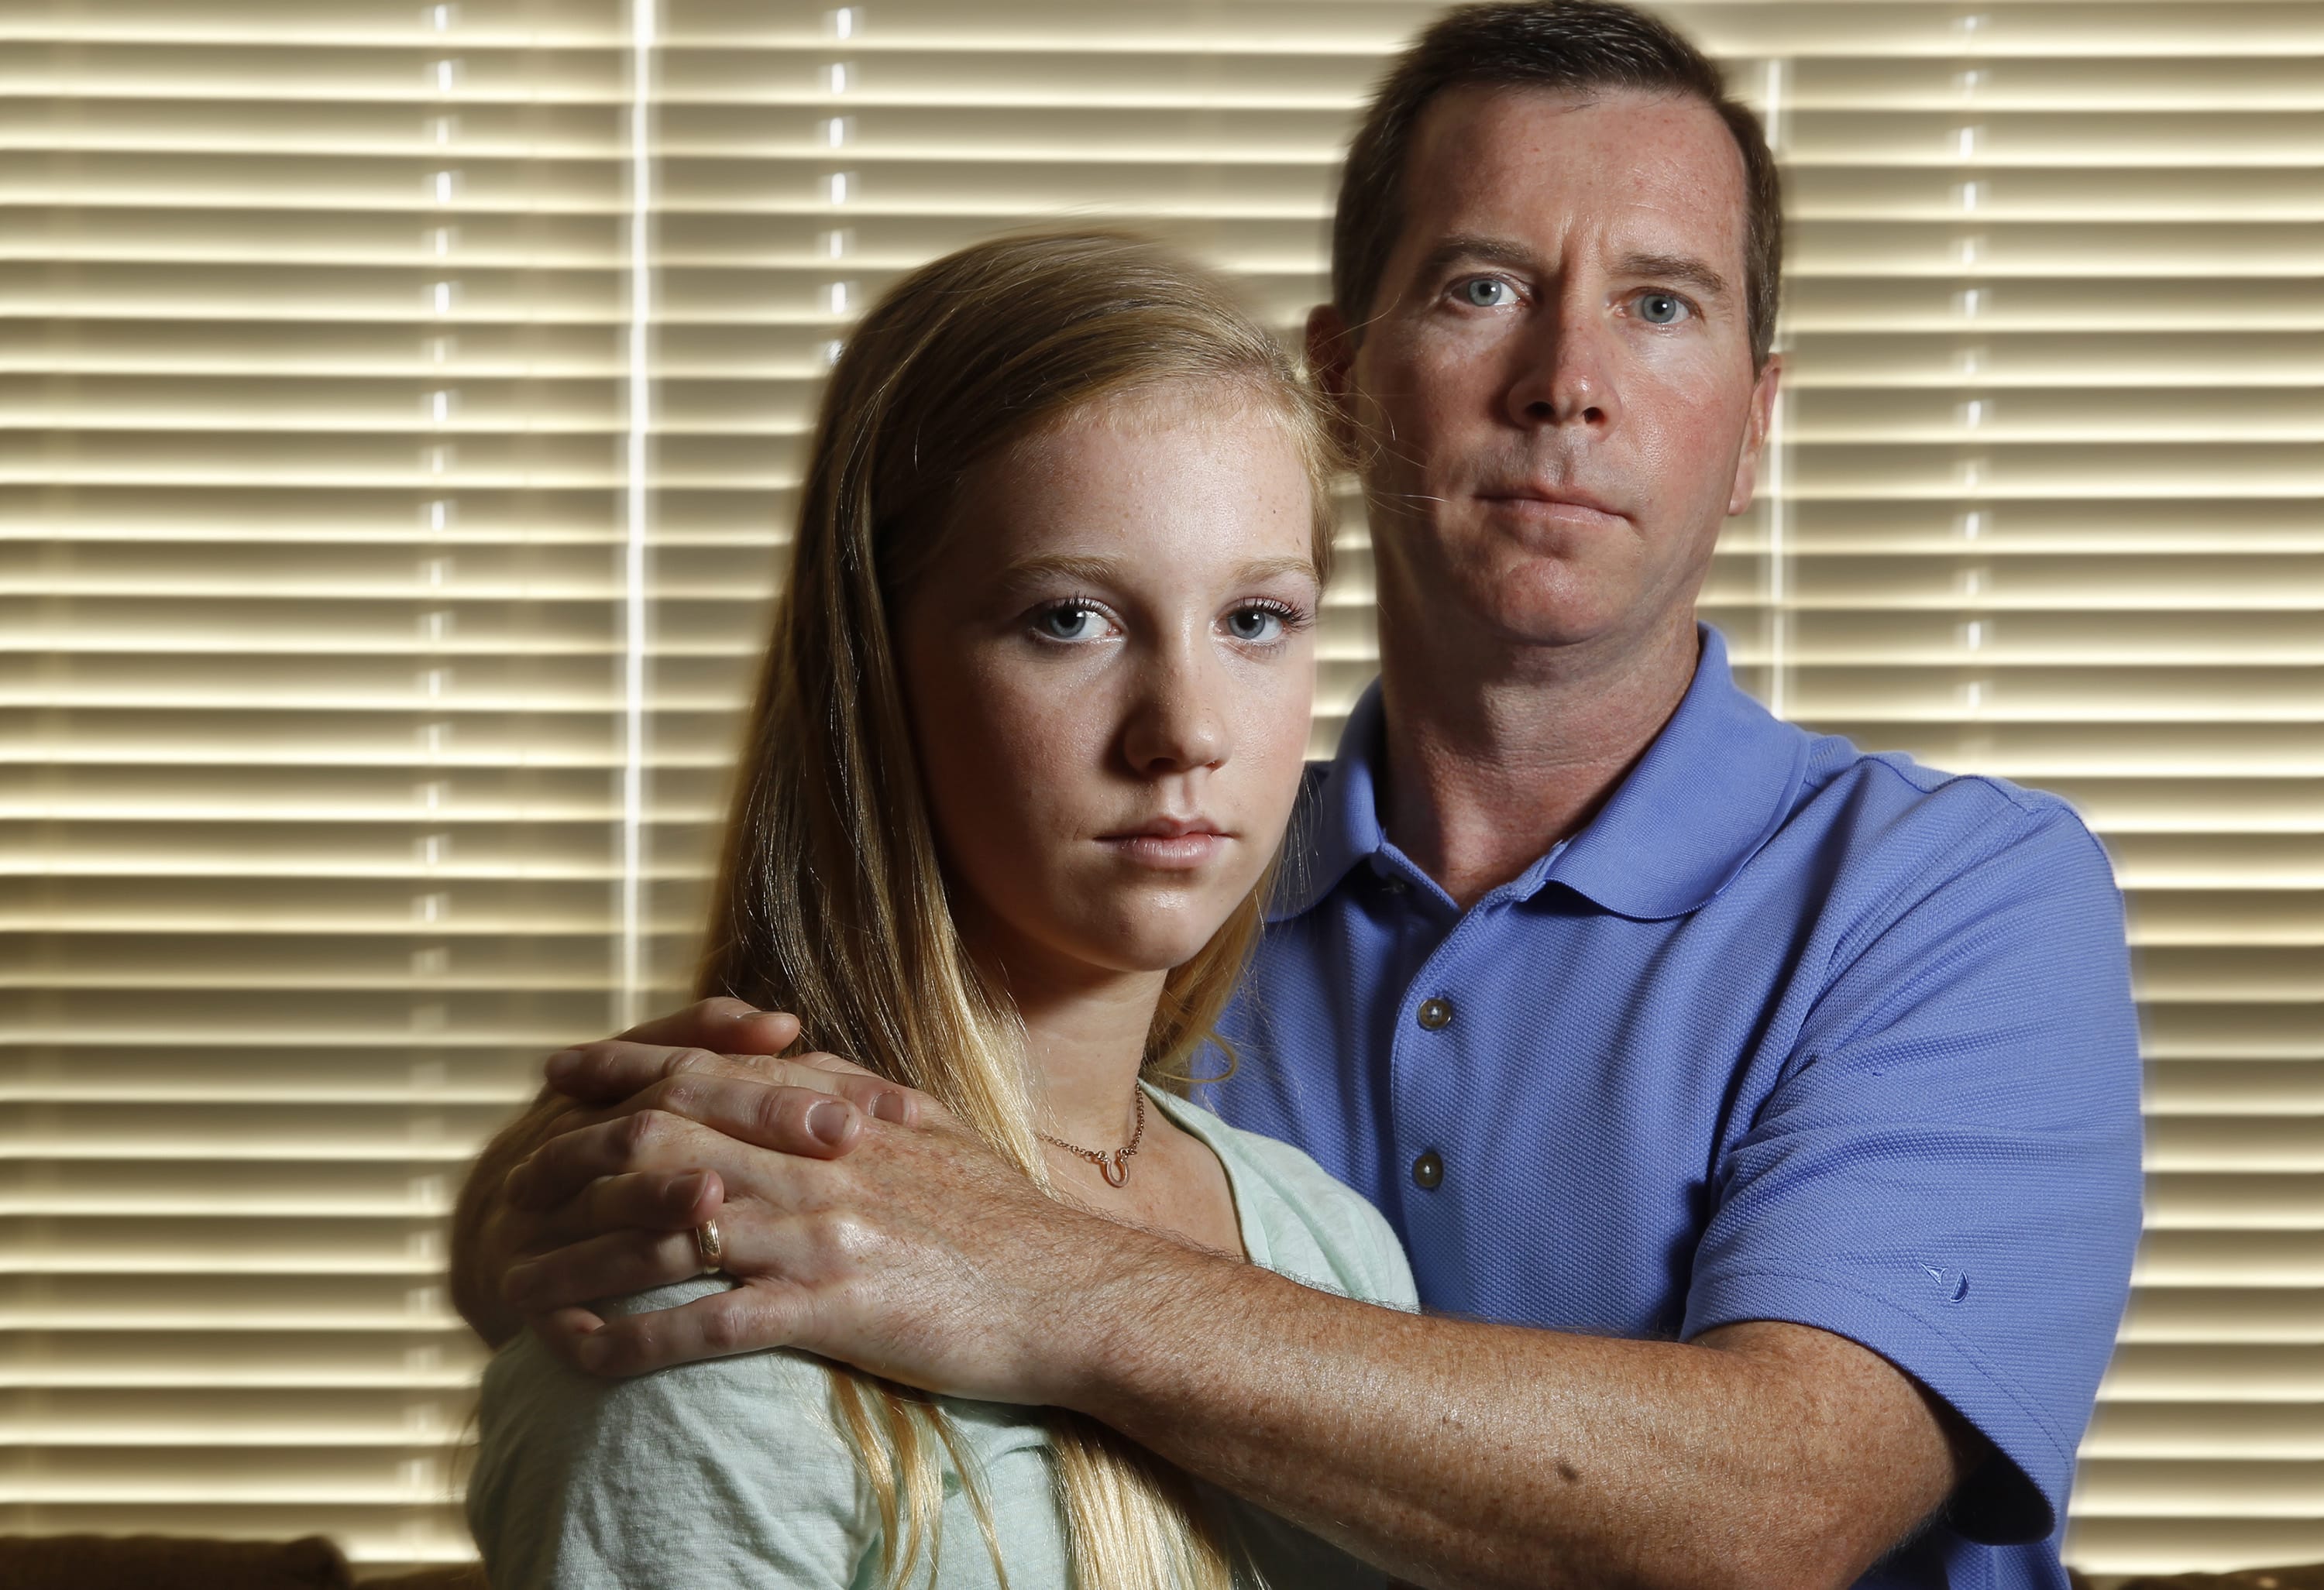 Bridget Sharkey, 14, left, and her father Mike Sharkey, who is trying to raise awareness about the condition called Misophonia, an understudied condition in which repetitive noises, such as chewing, sends a person into flight or fight mode.